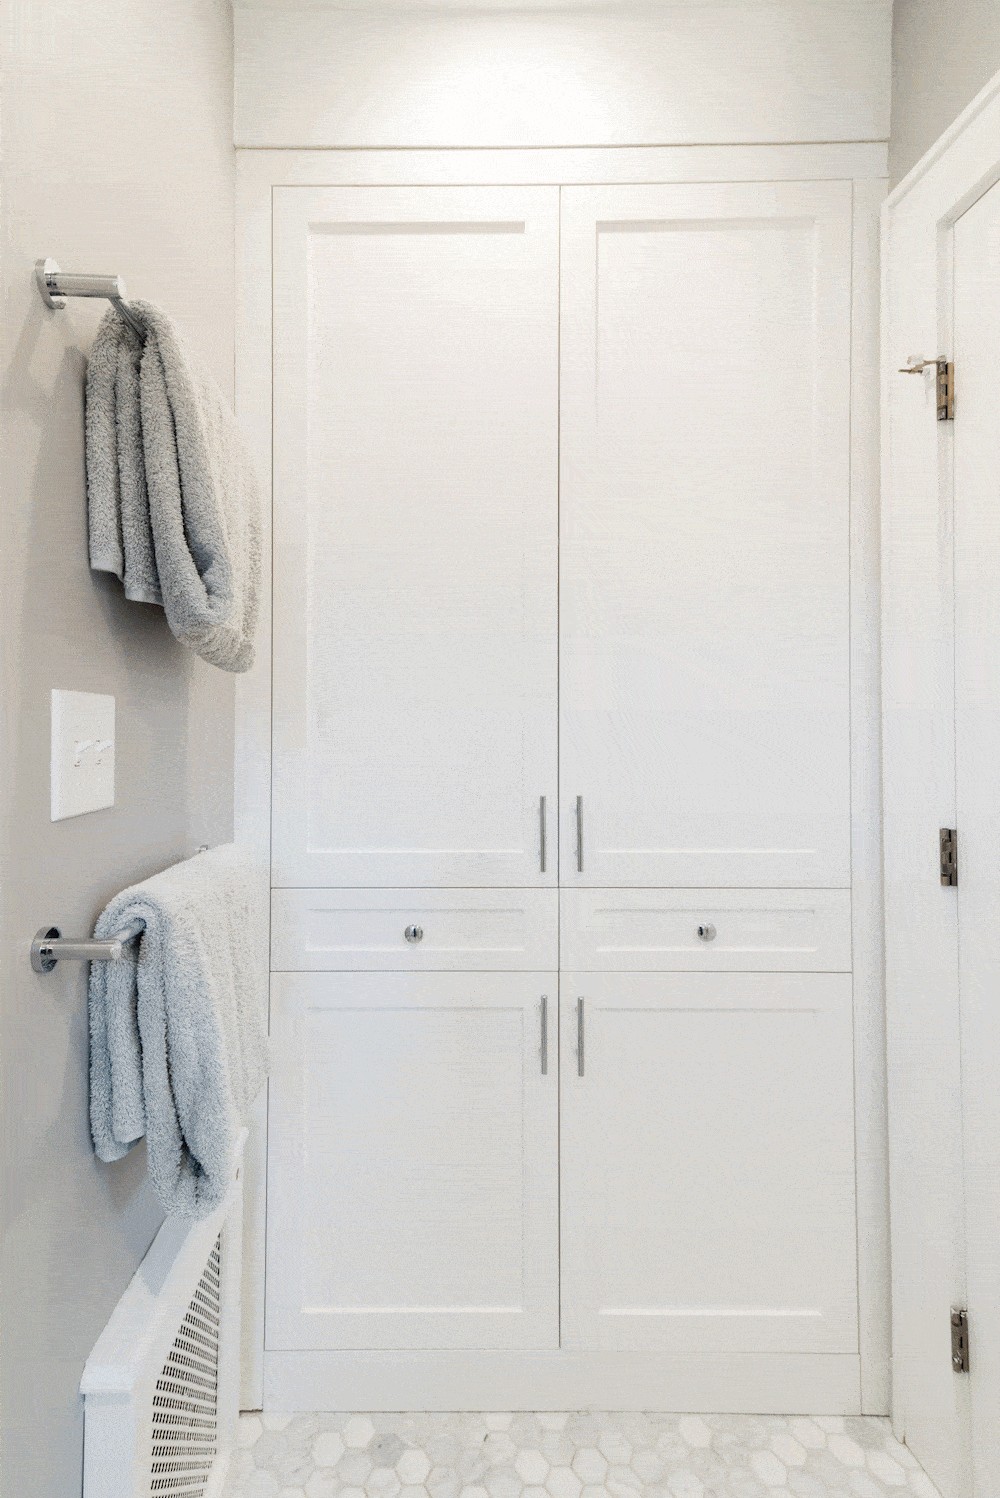 Large white linen closet and gray wall with towel hangers in the bathroom after renovation